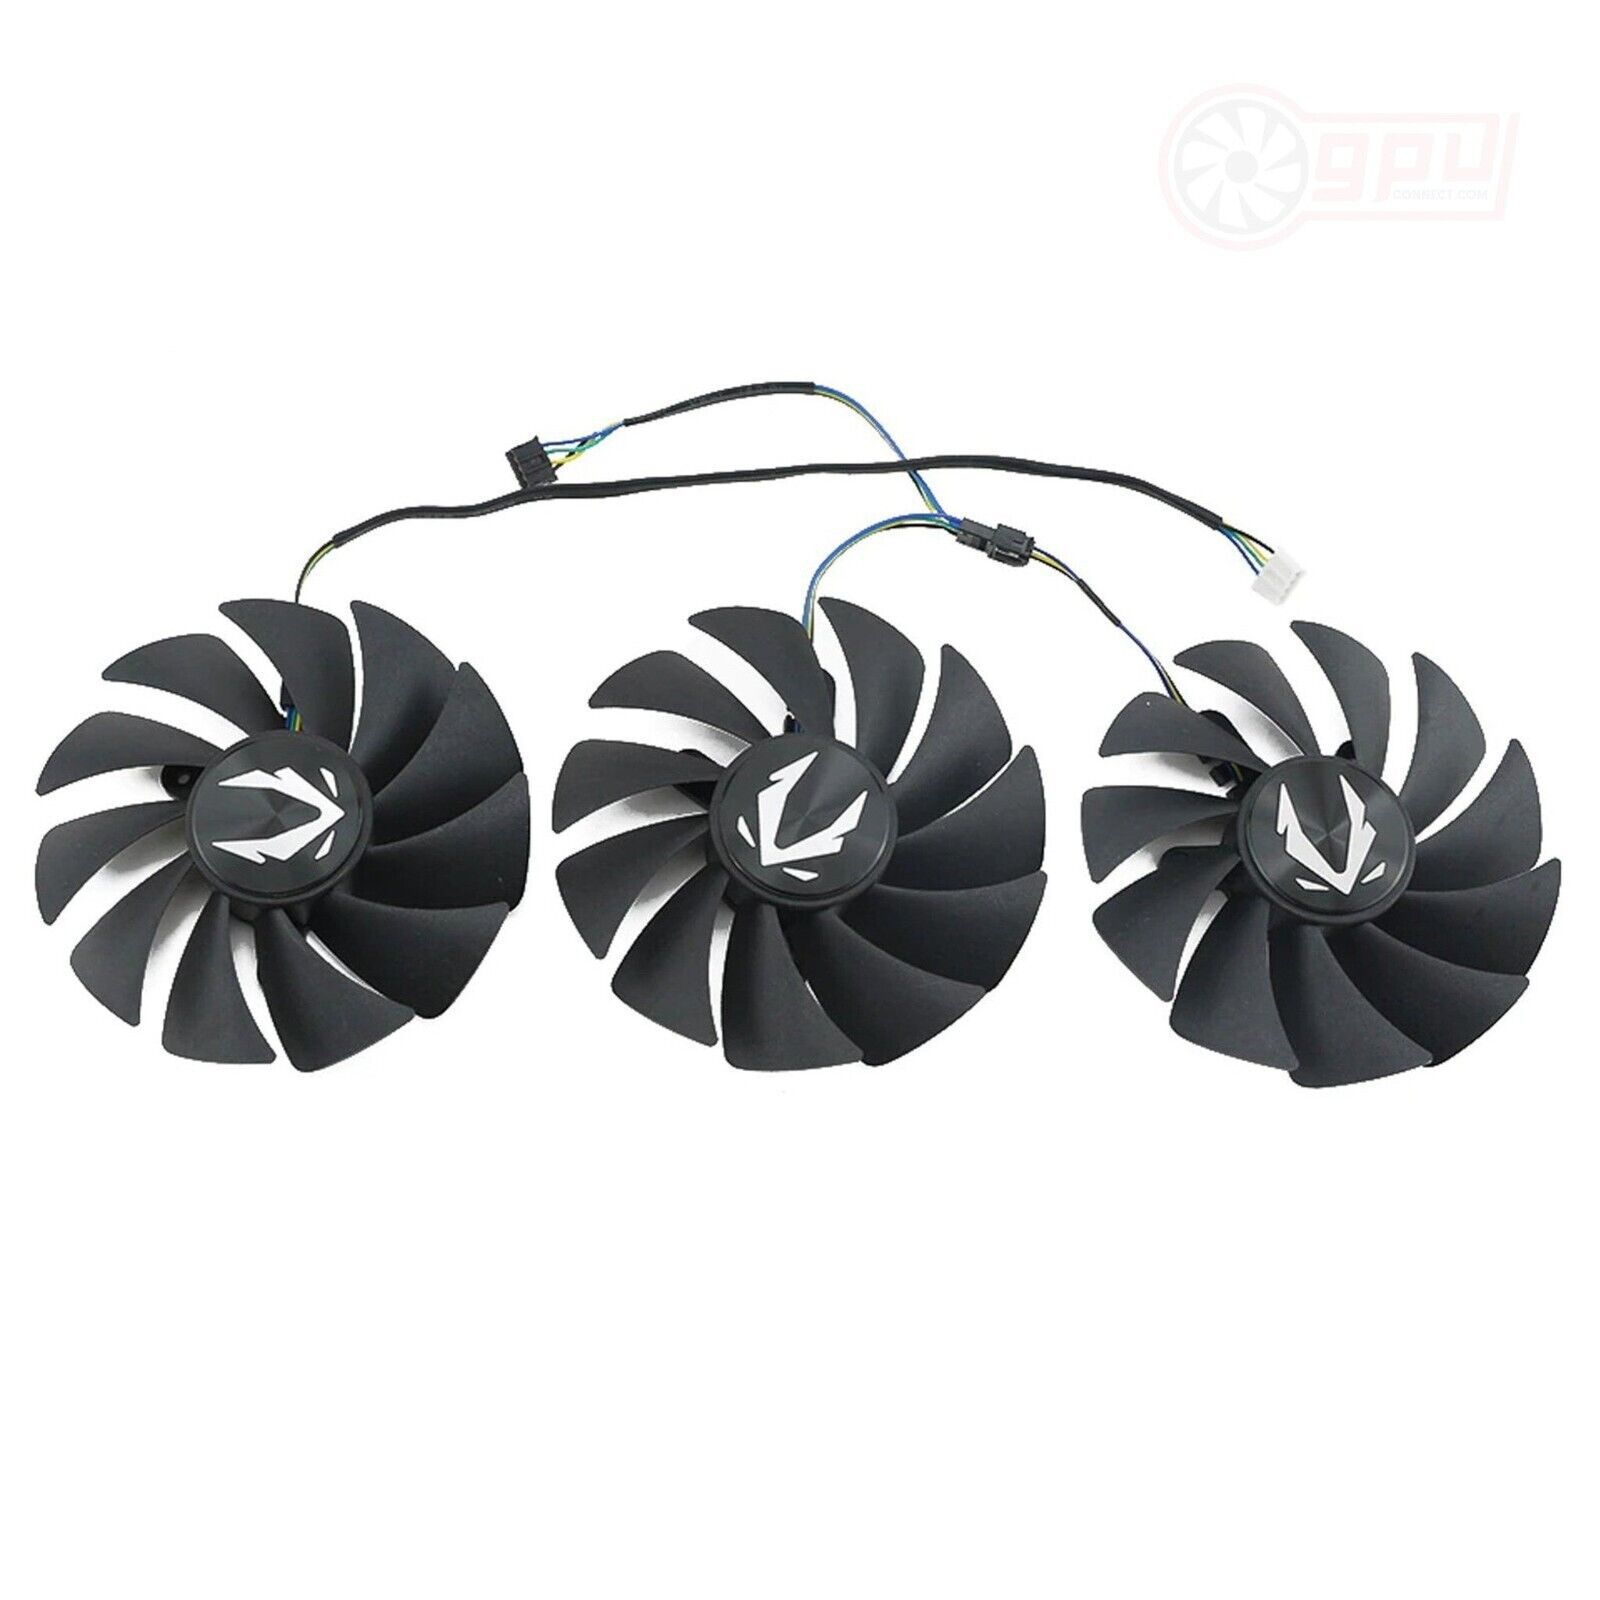 Zotac RTX 3070 Ti 3080 Ti GAMING AMP Holo OC - Replacement Graphics Card Fans